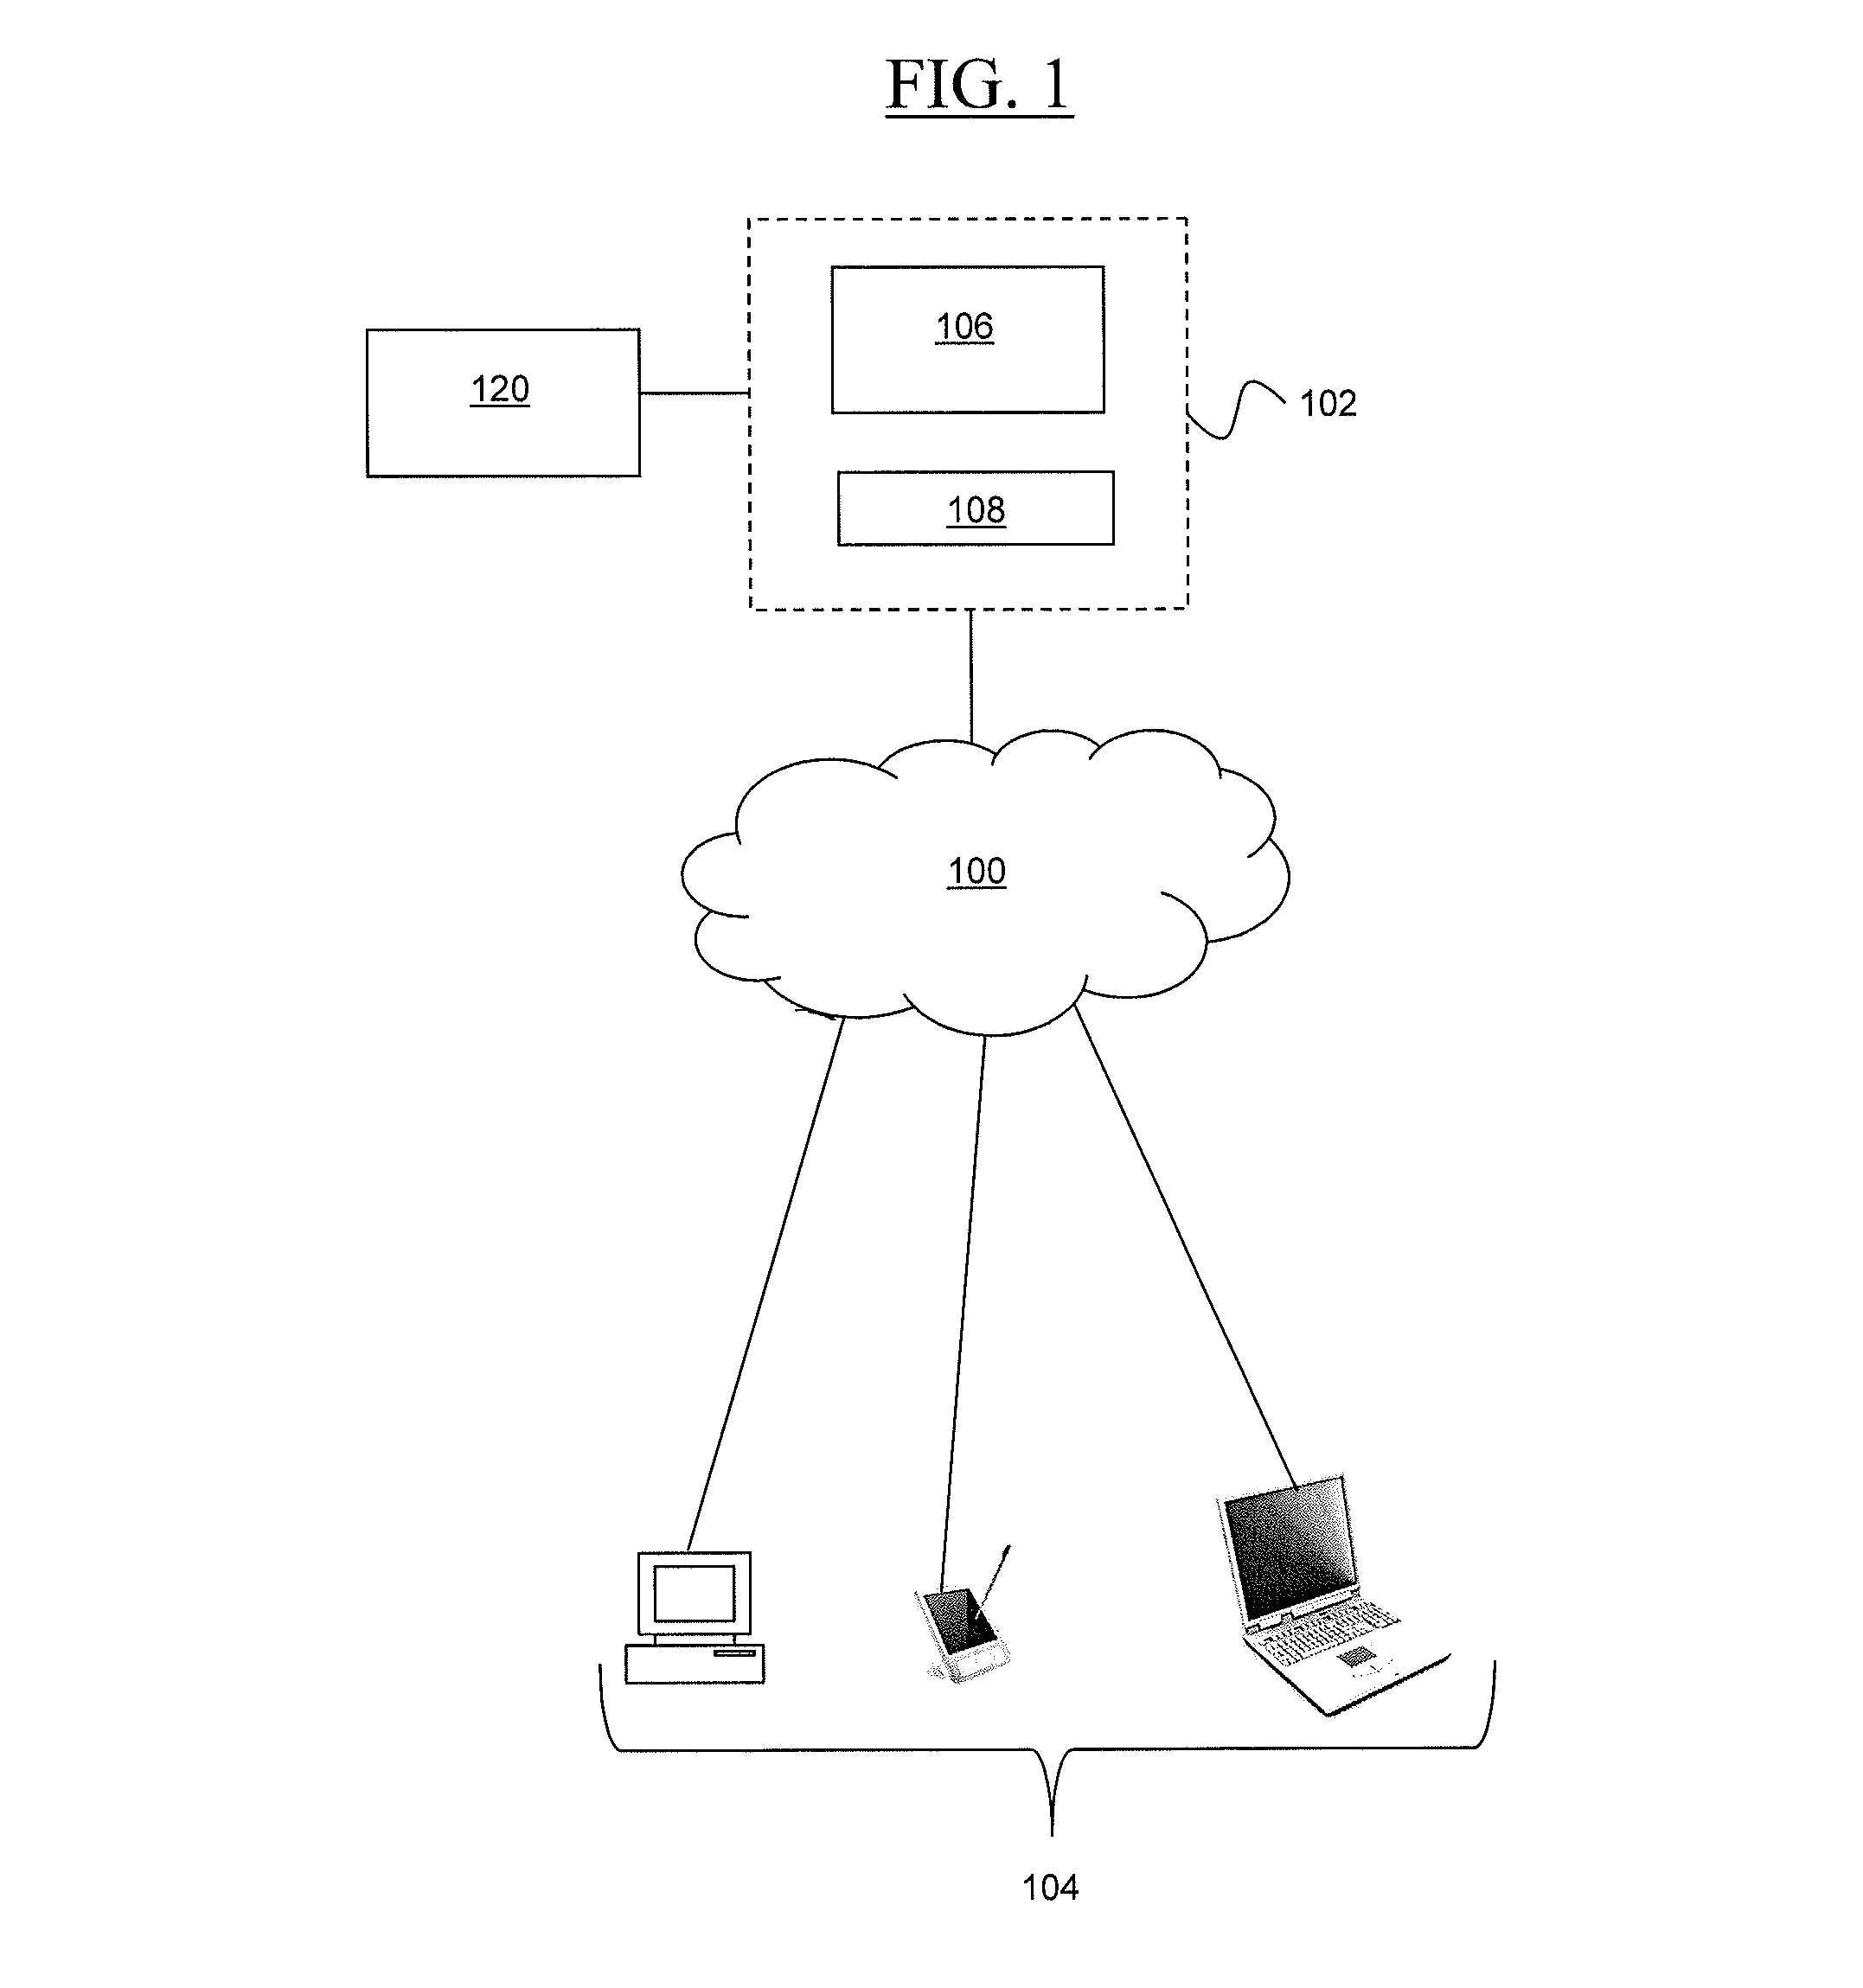 Systems and methods for controlling access to content distributed over a network